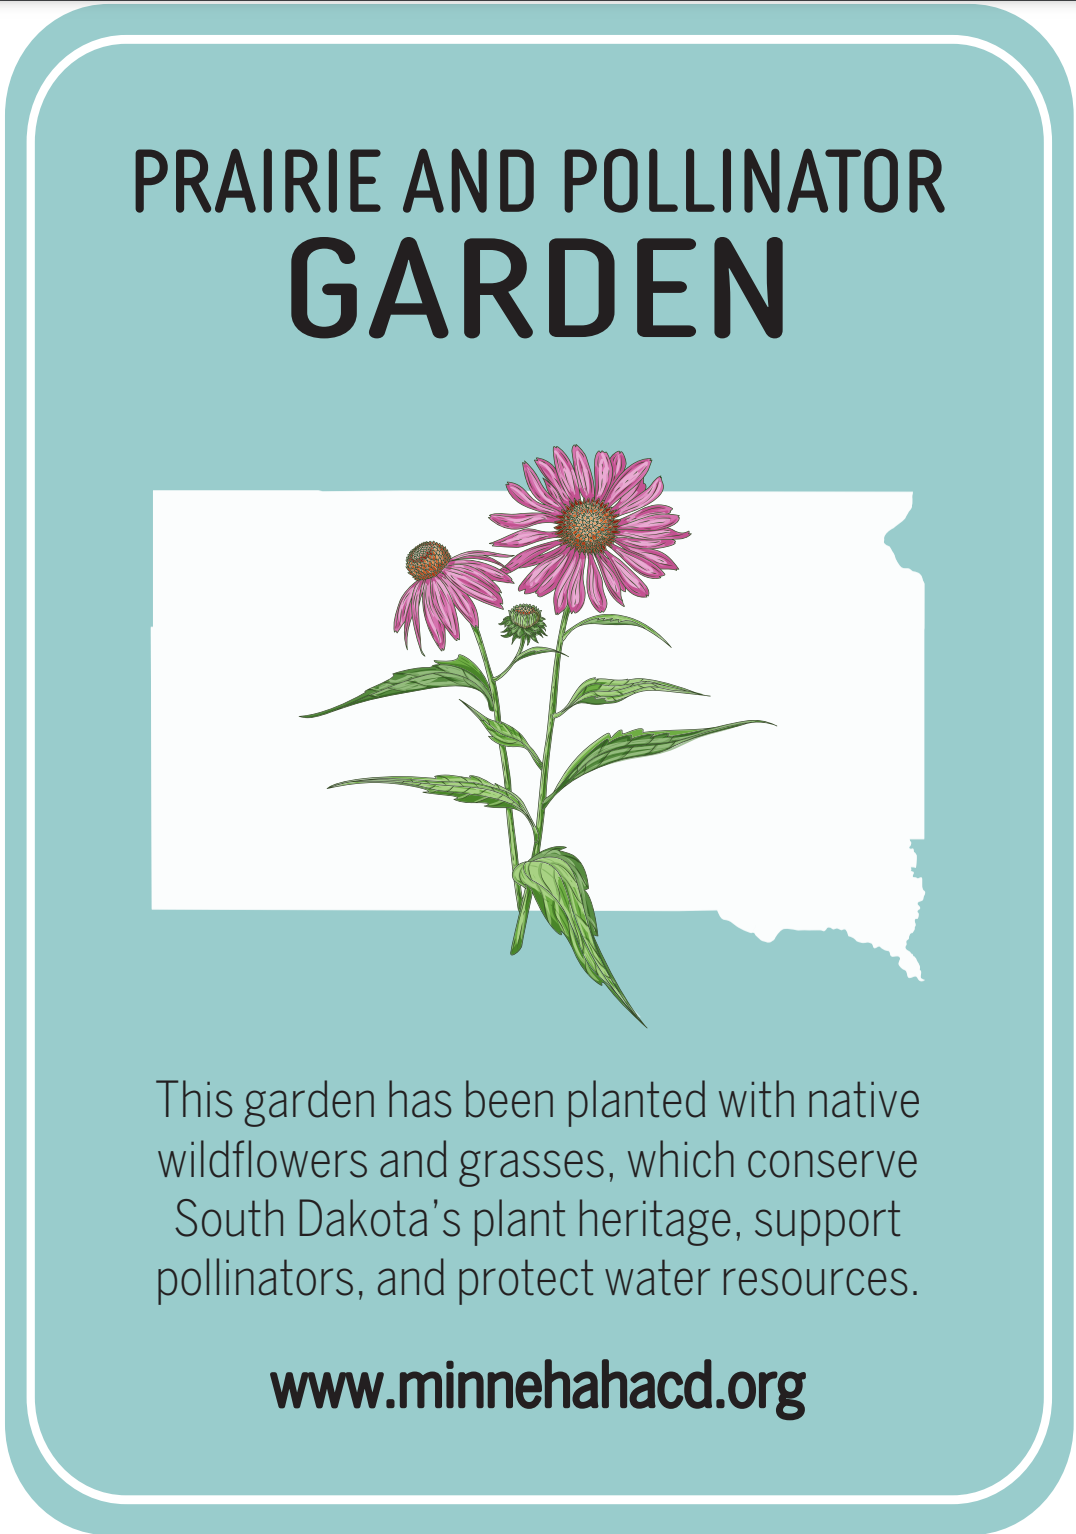 This new partnership will bring more native grasses, flowers to Sioux Falls